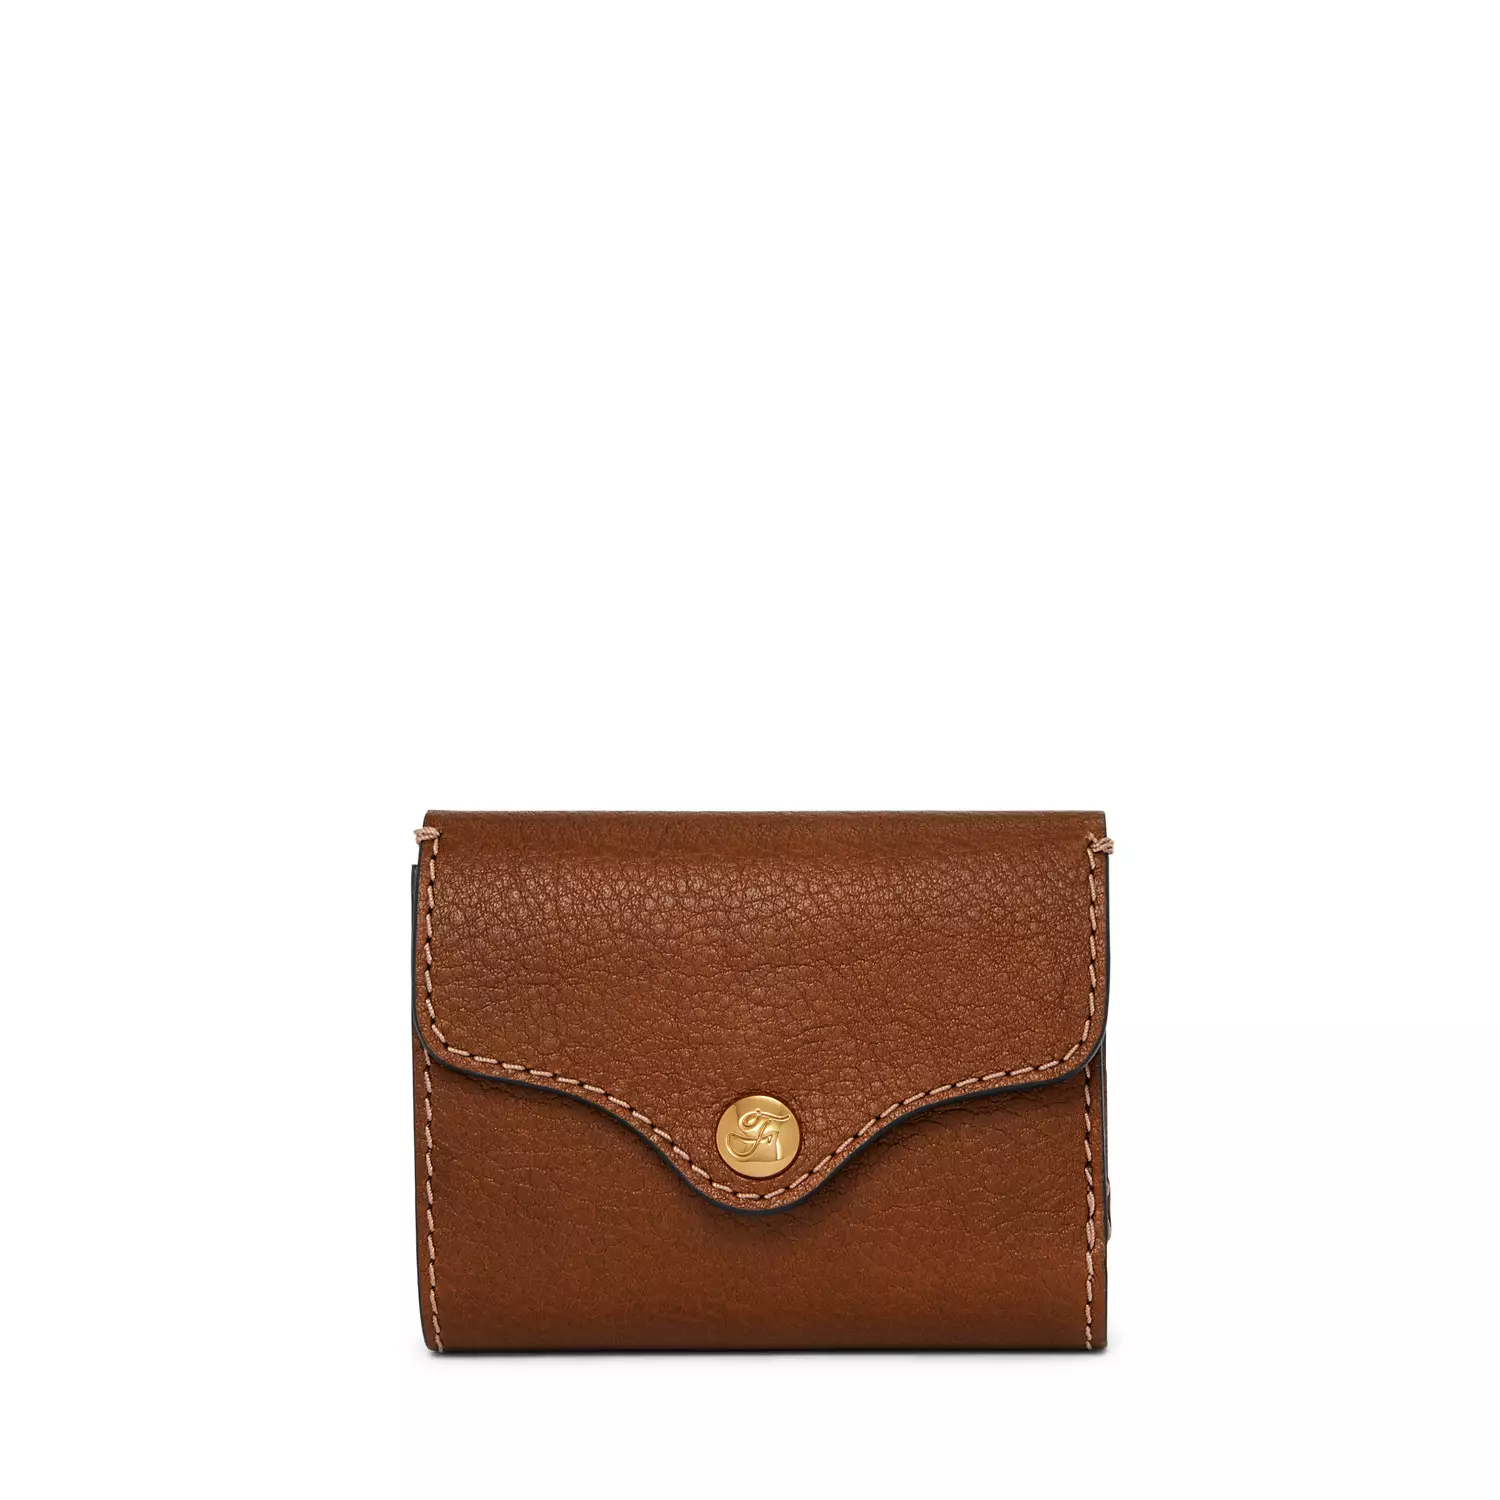 Jual Fossil Fossil Heritage Trifold Brown Leather Dompet Wanita